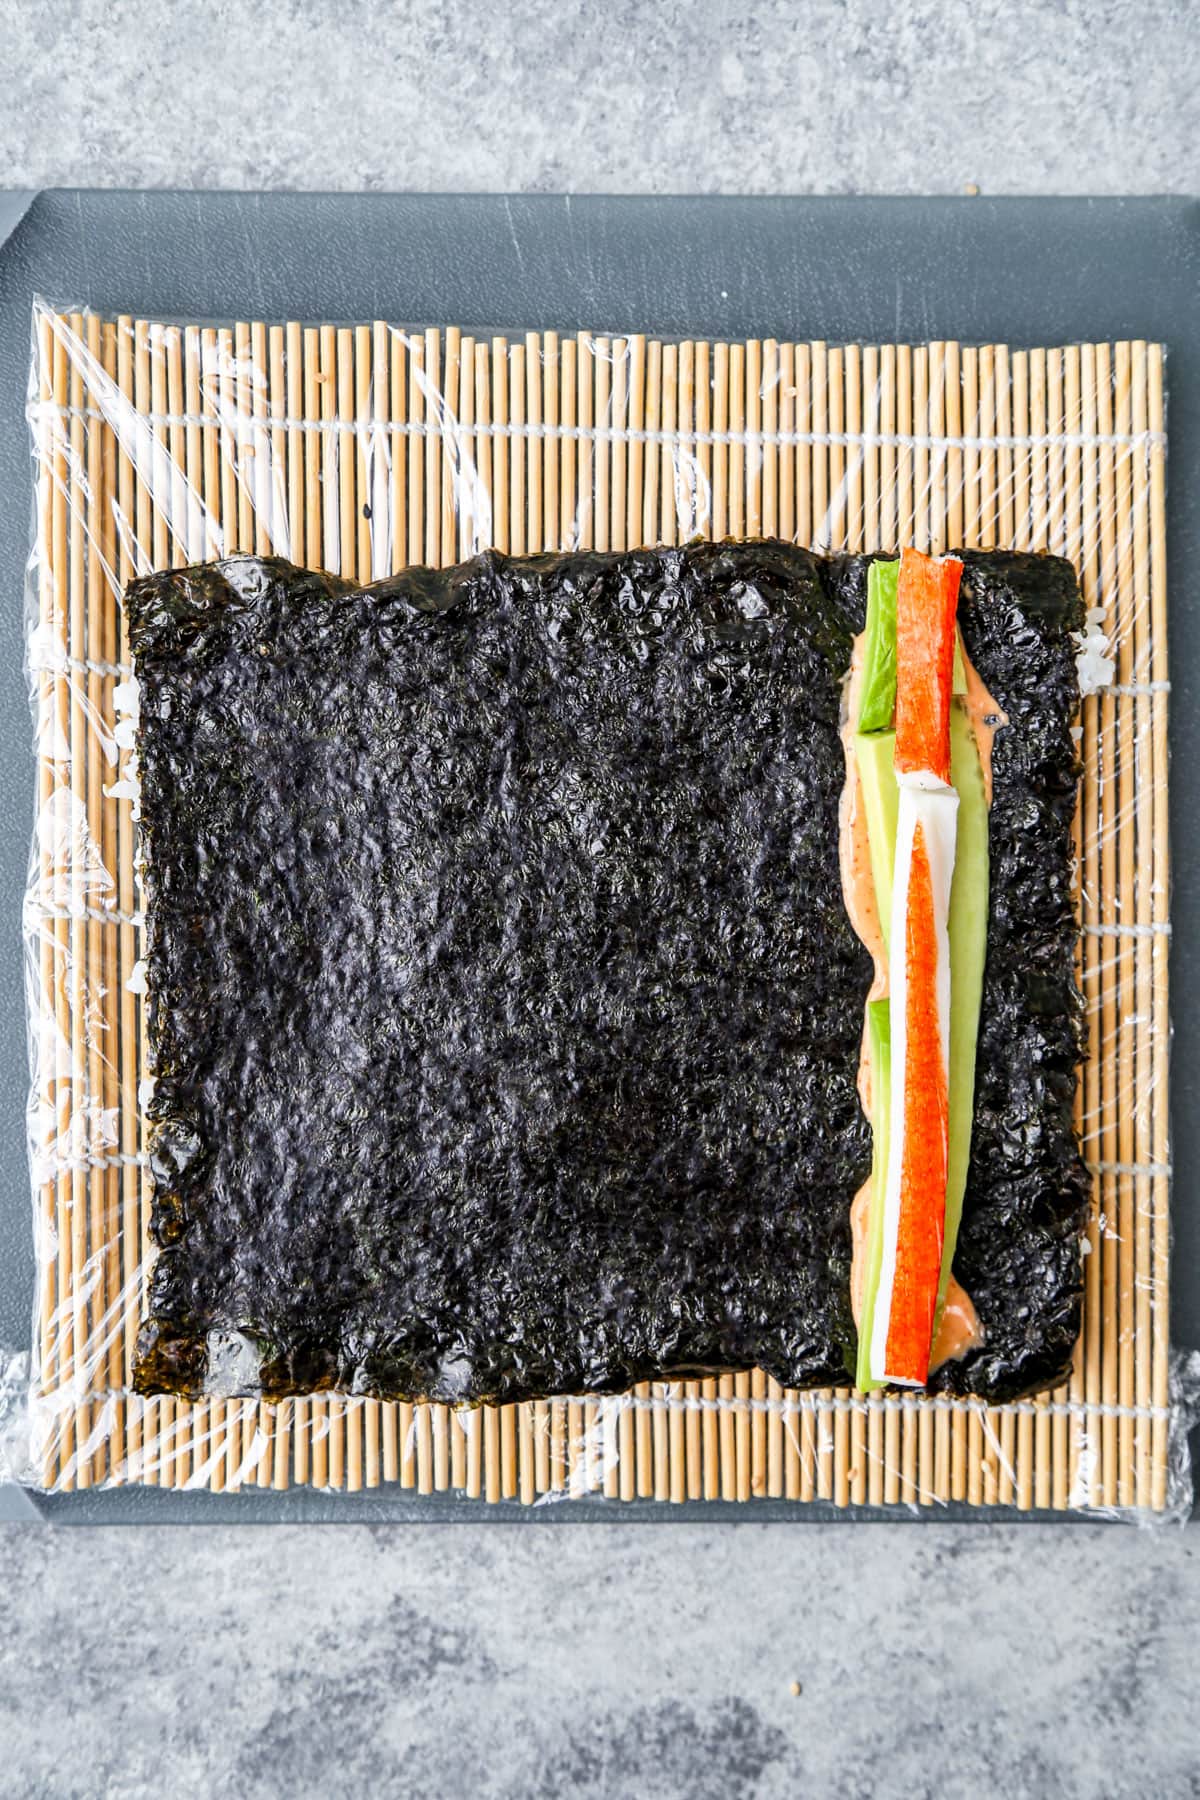 nori with vegetables